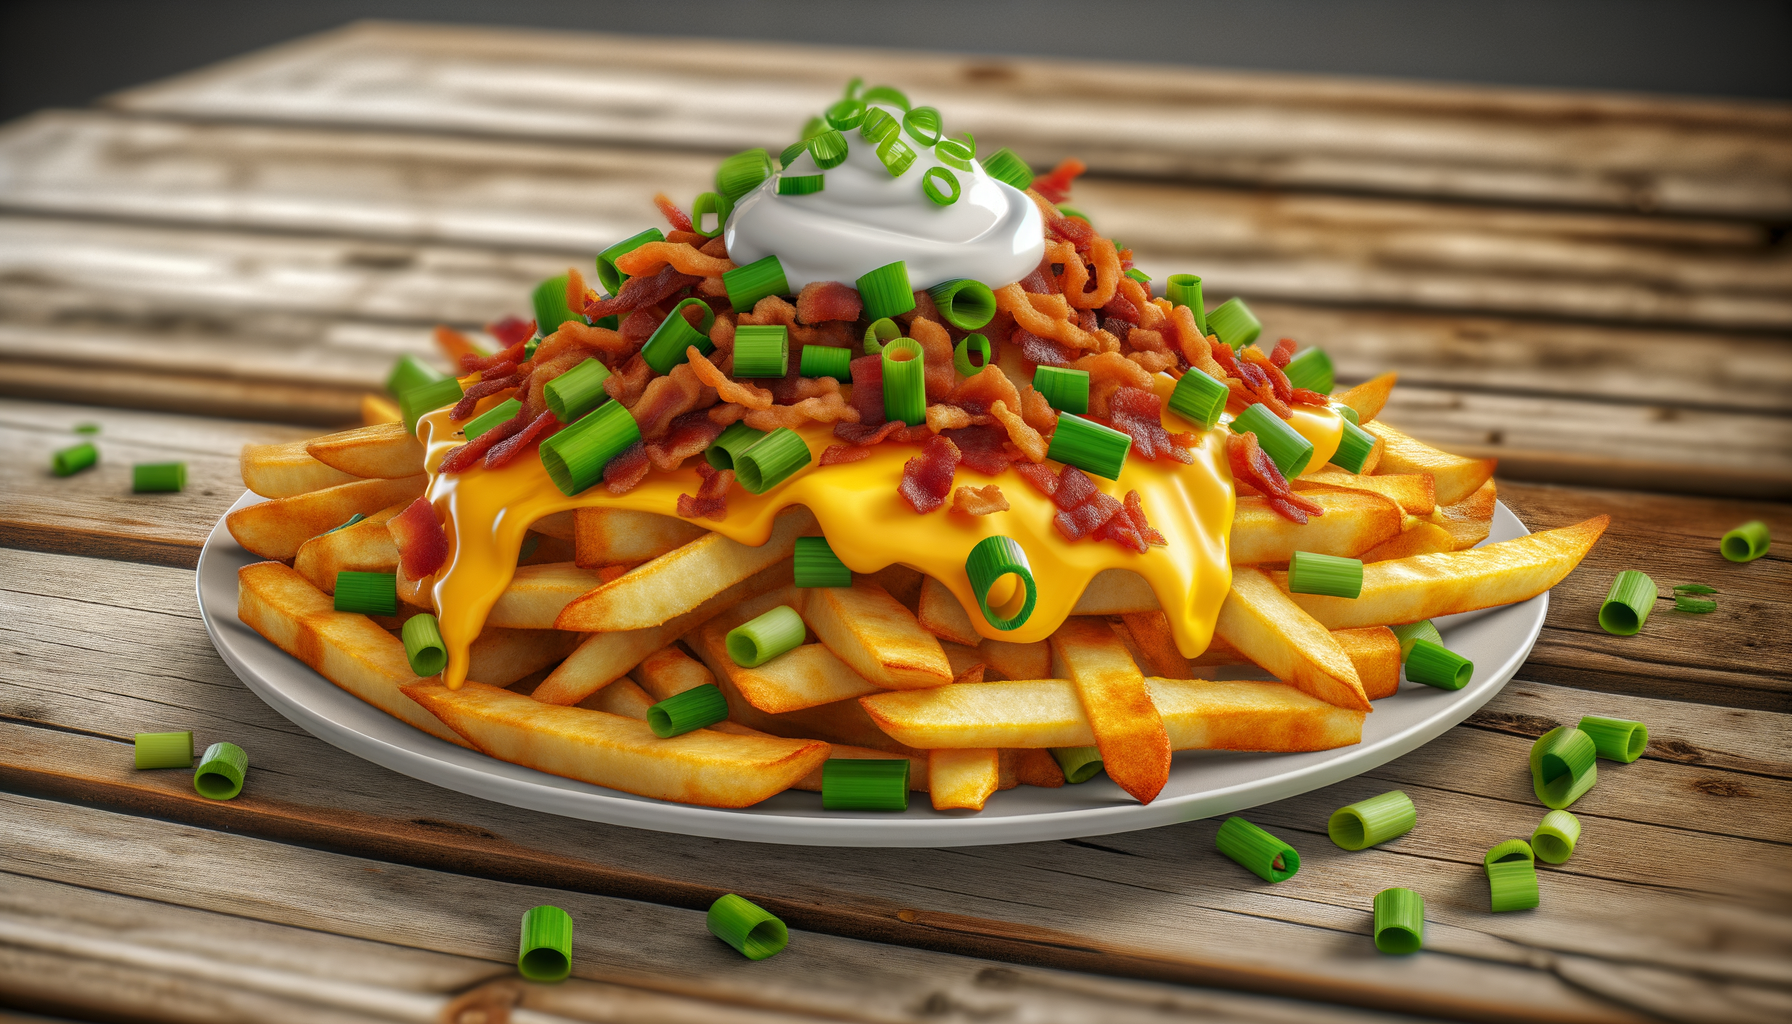 A plate of homemade loaded fries with melted cheese, bacon bits, green onions, and sour cream on a wooden table.